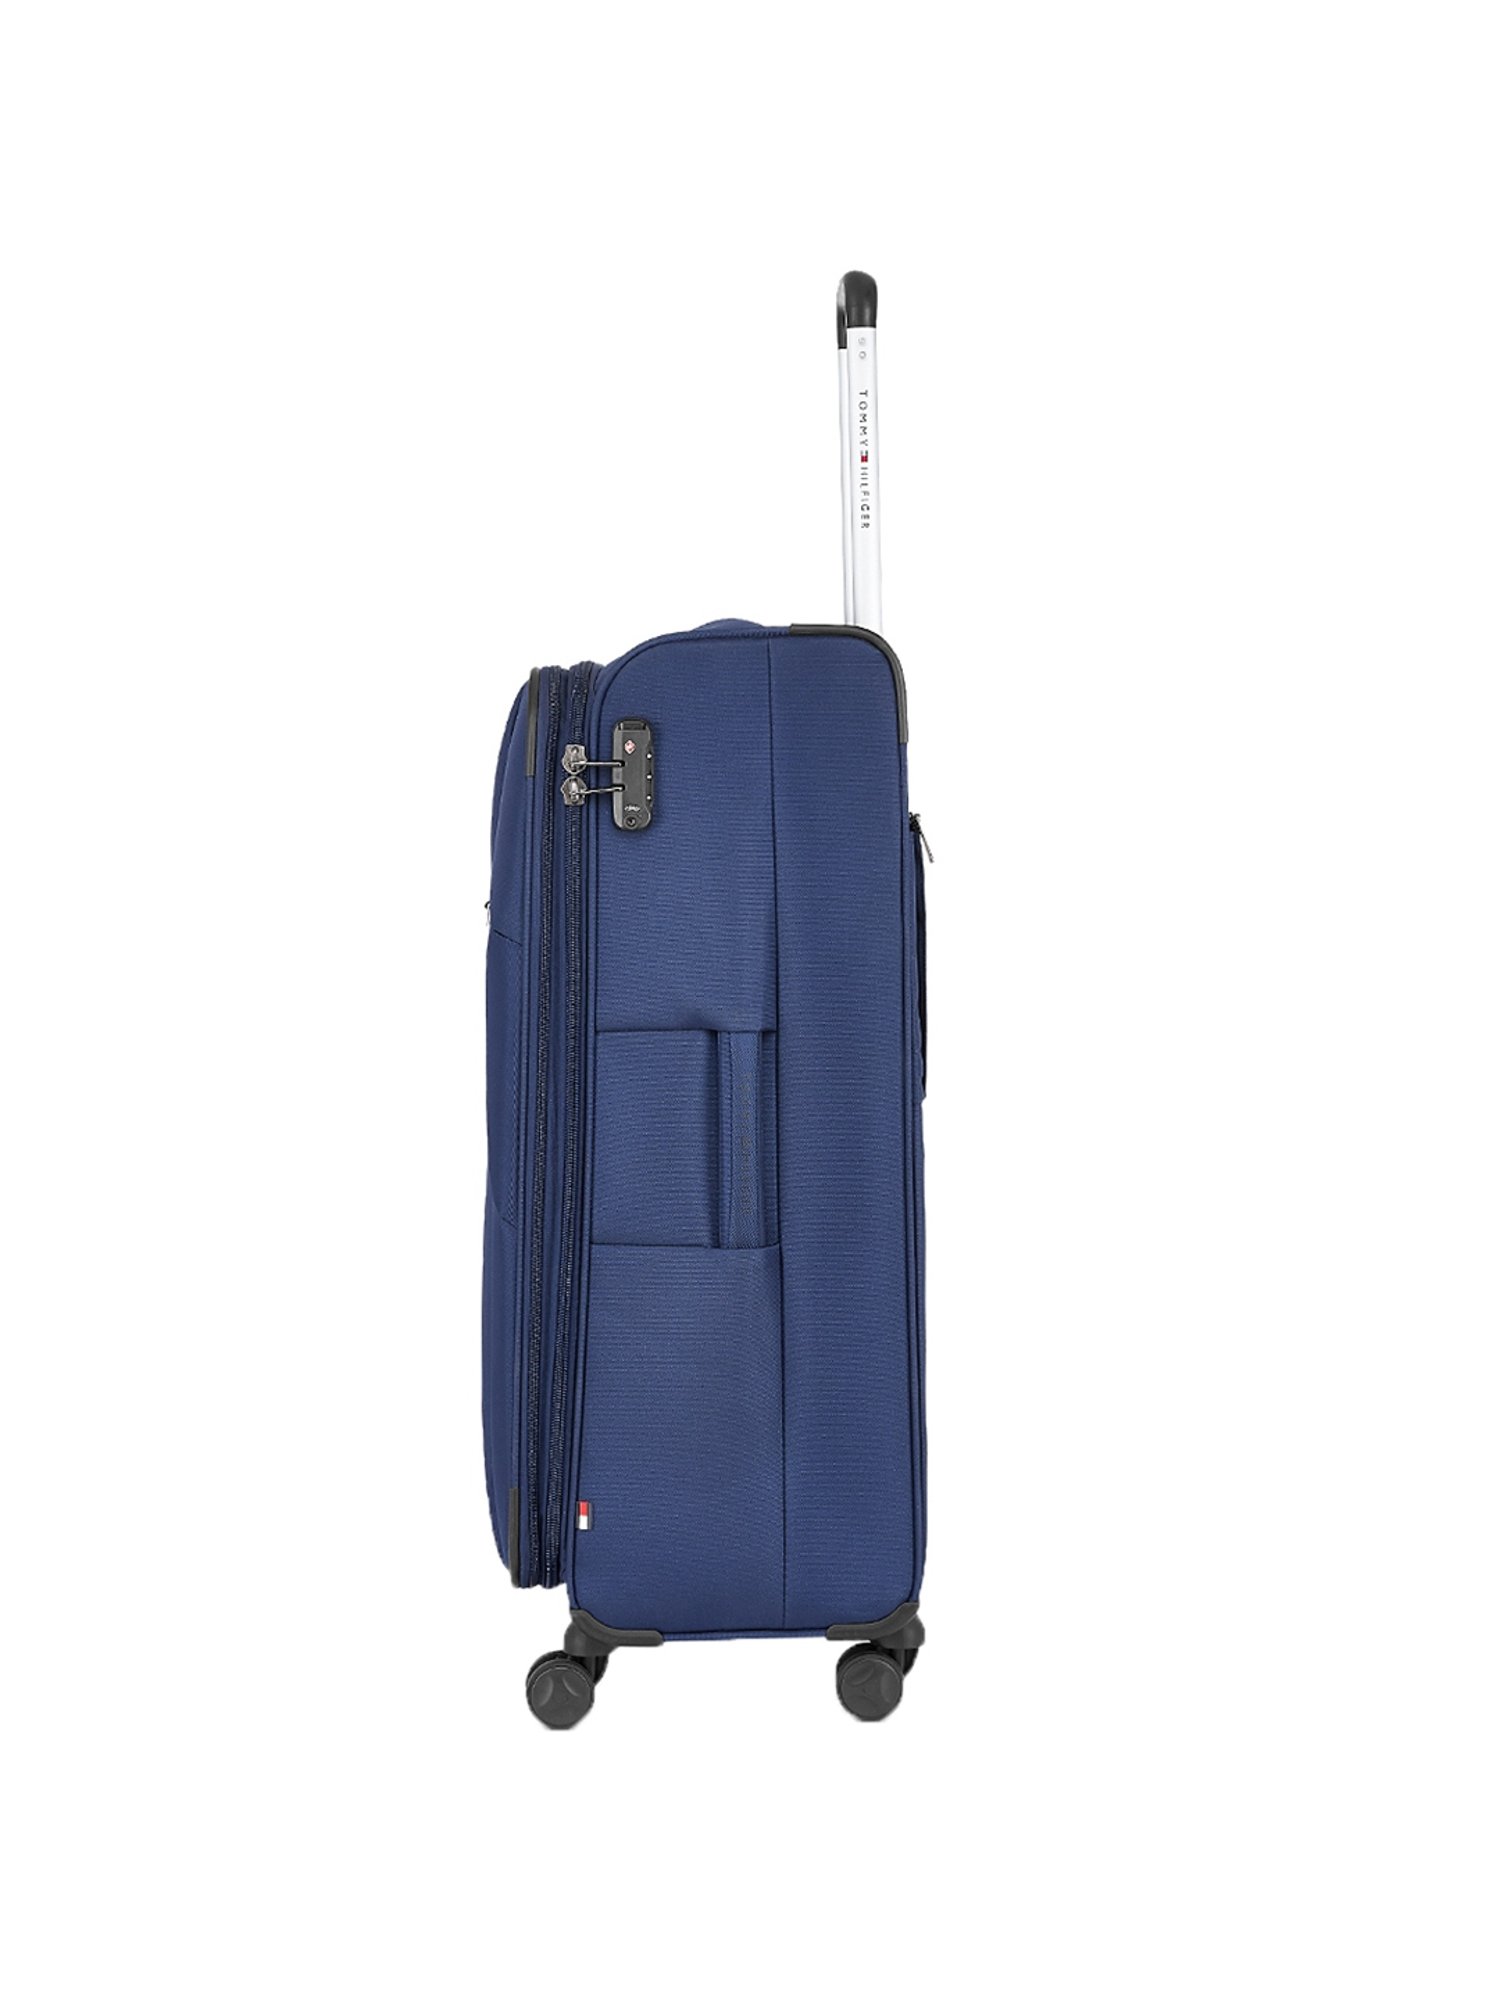 Buy Tommy Hilfiger Seattle Navy Cabin - 46.5 cm Online At Best Price @ Tata CLiQ